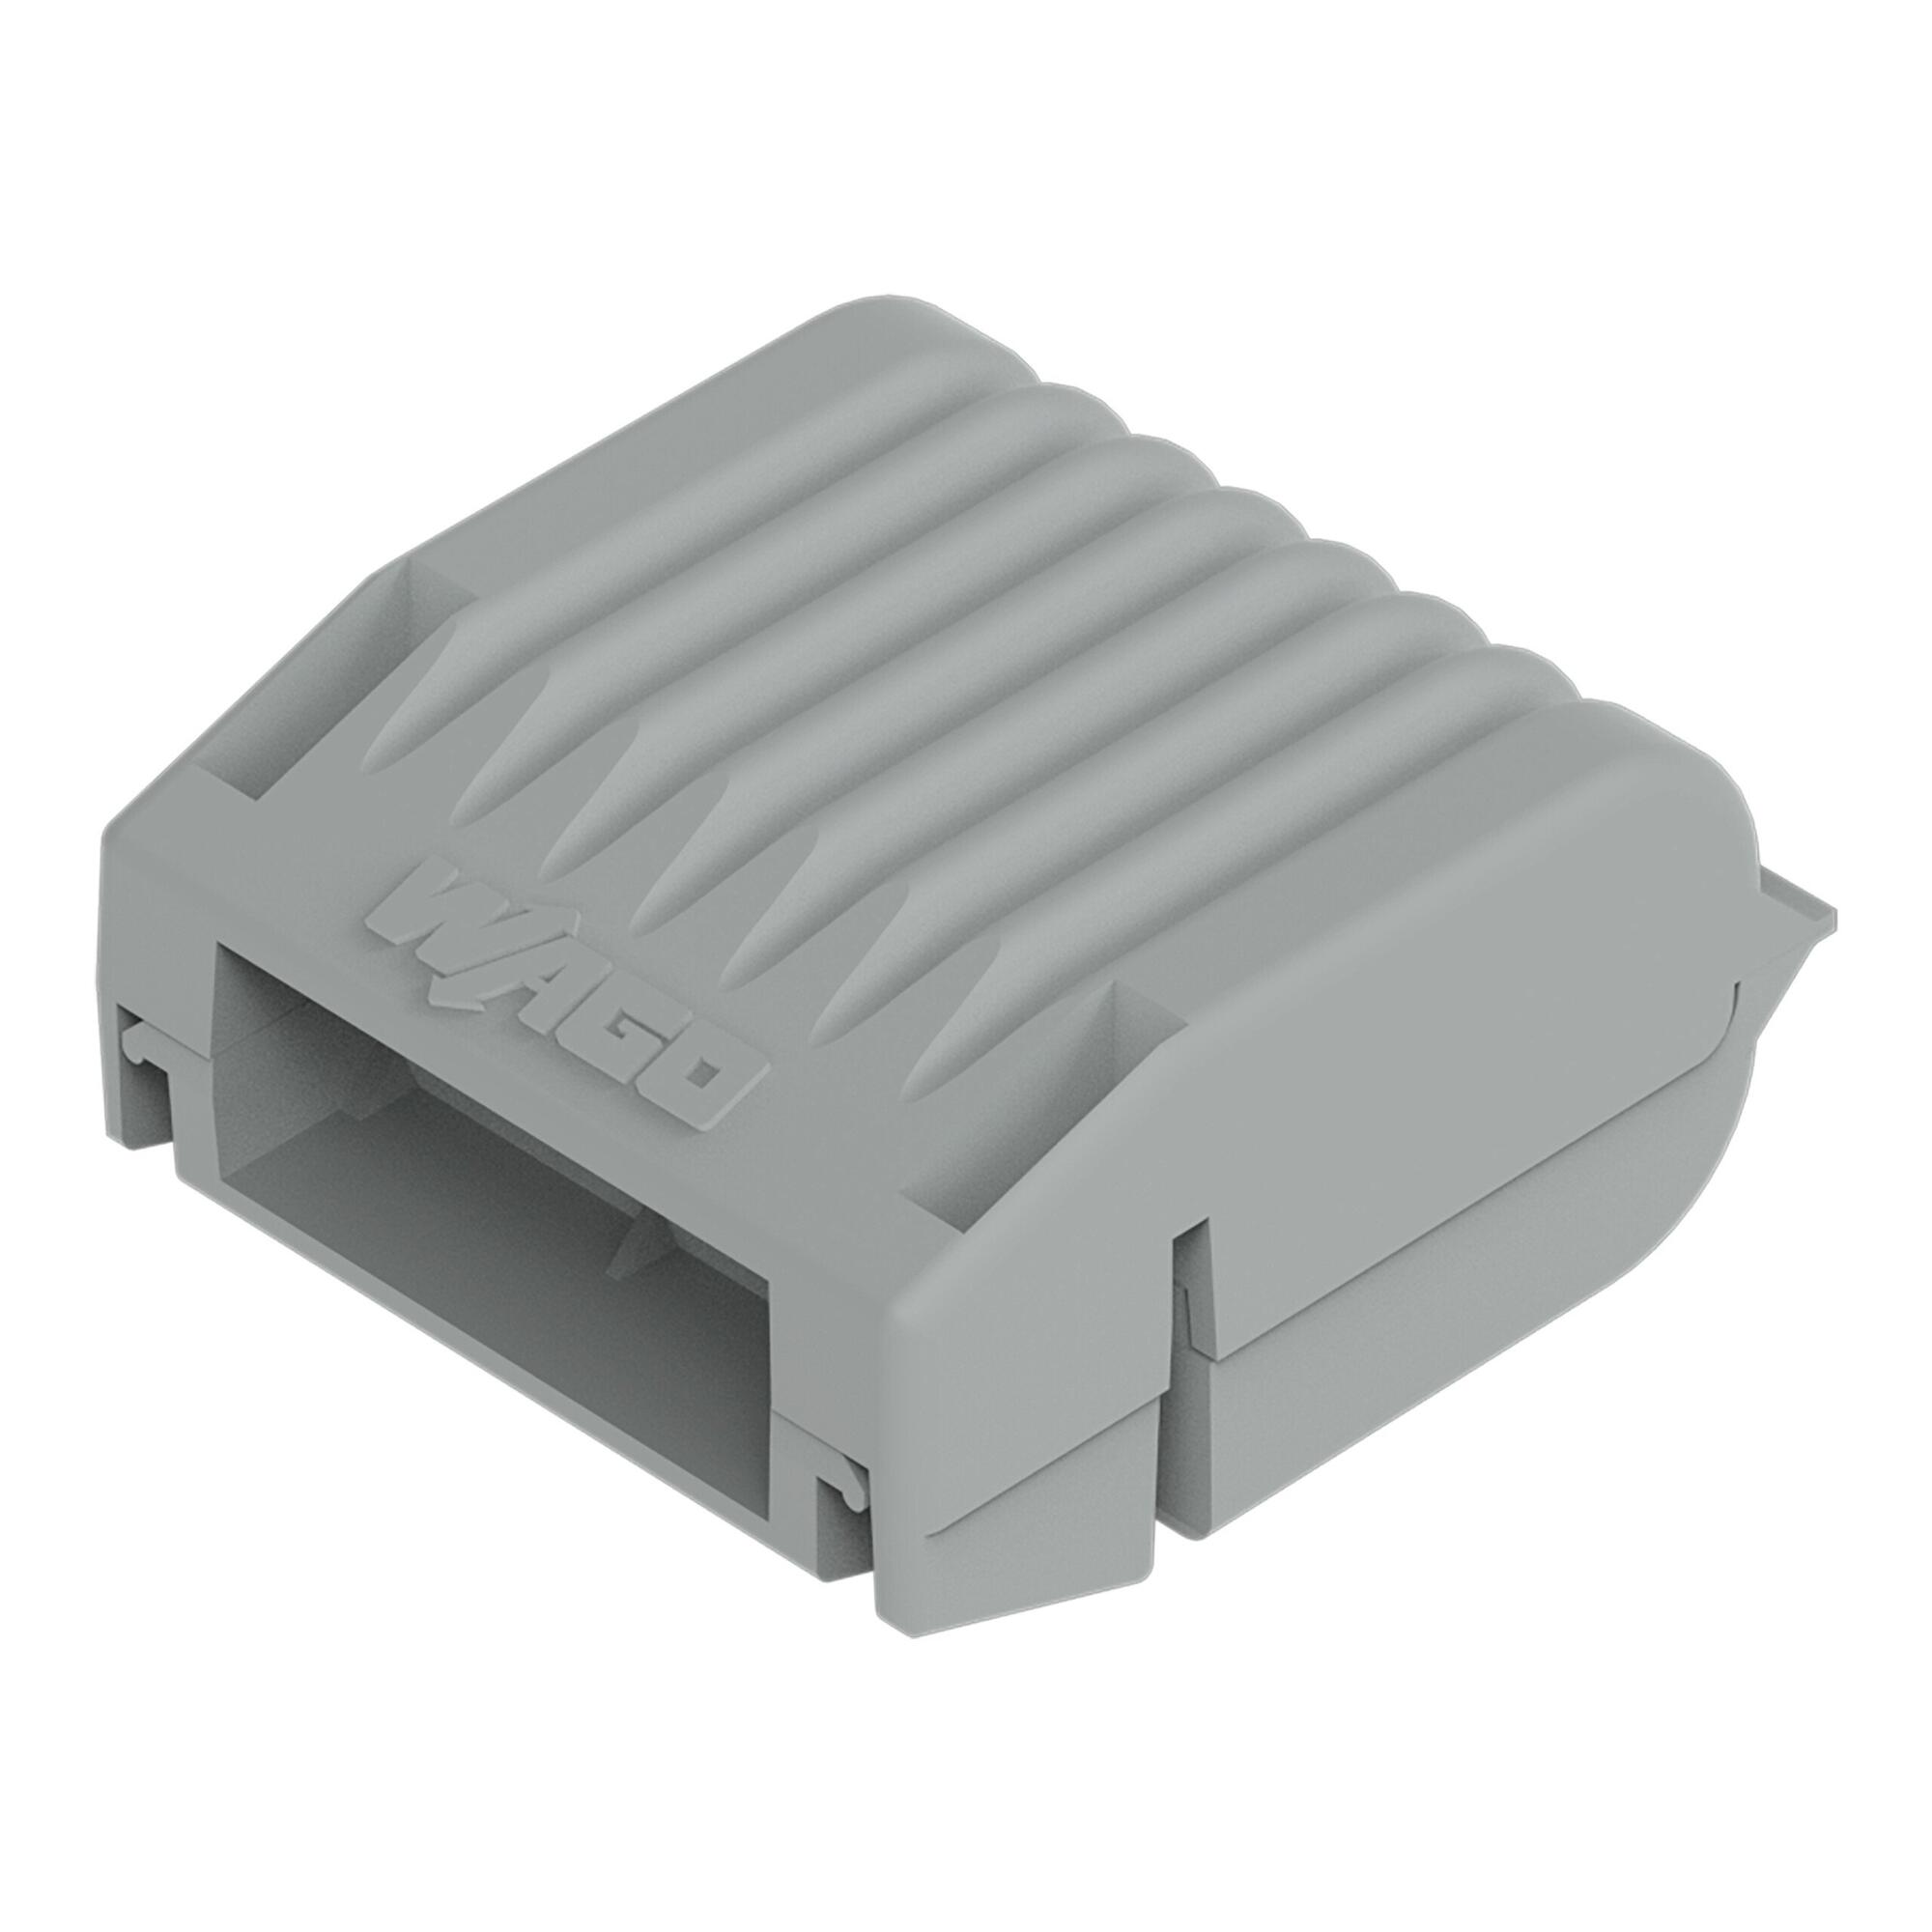 Wago 221 Connector Universal Mount by Wiseone